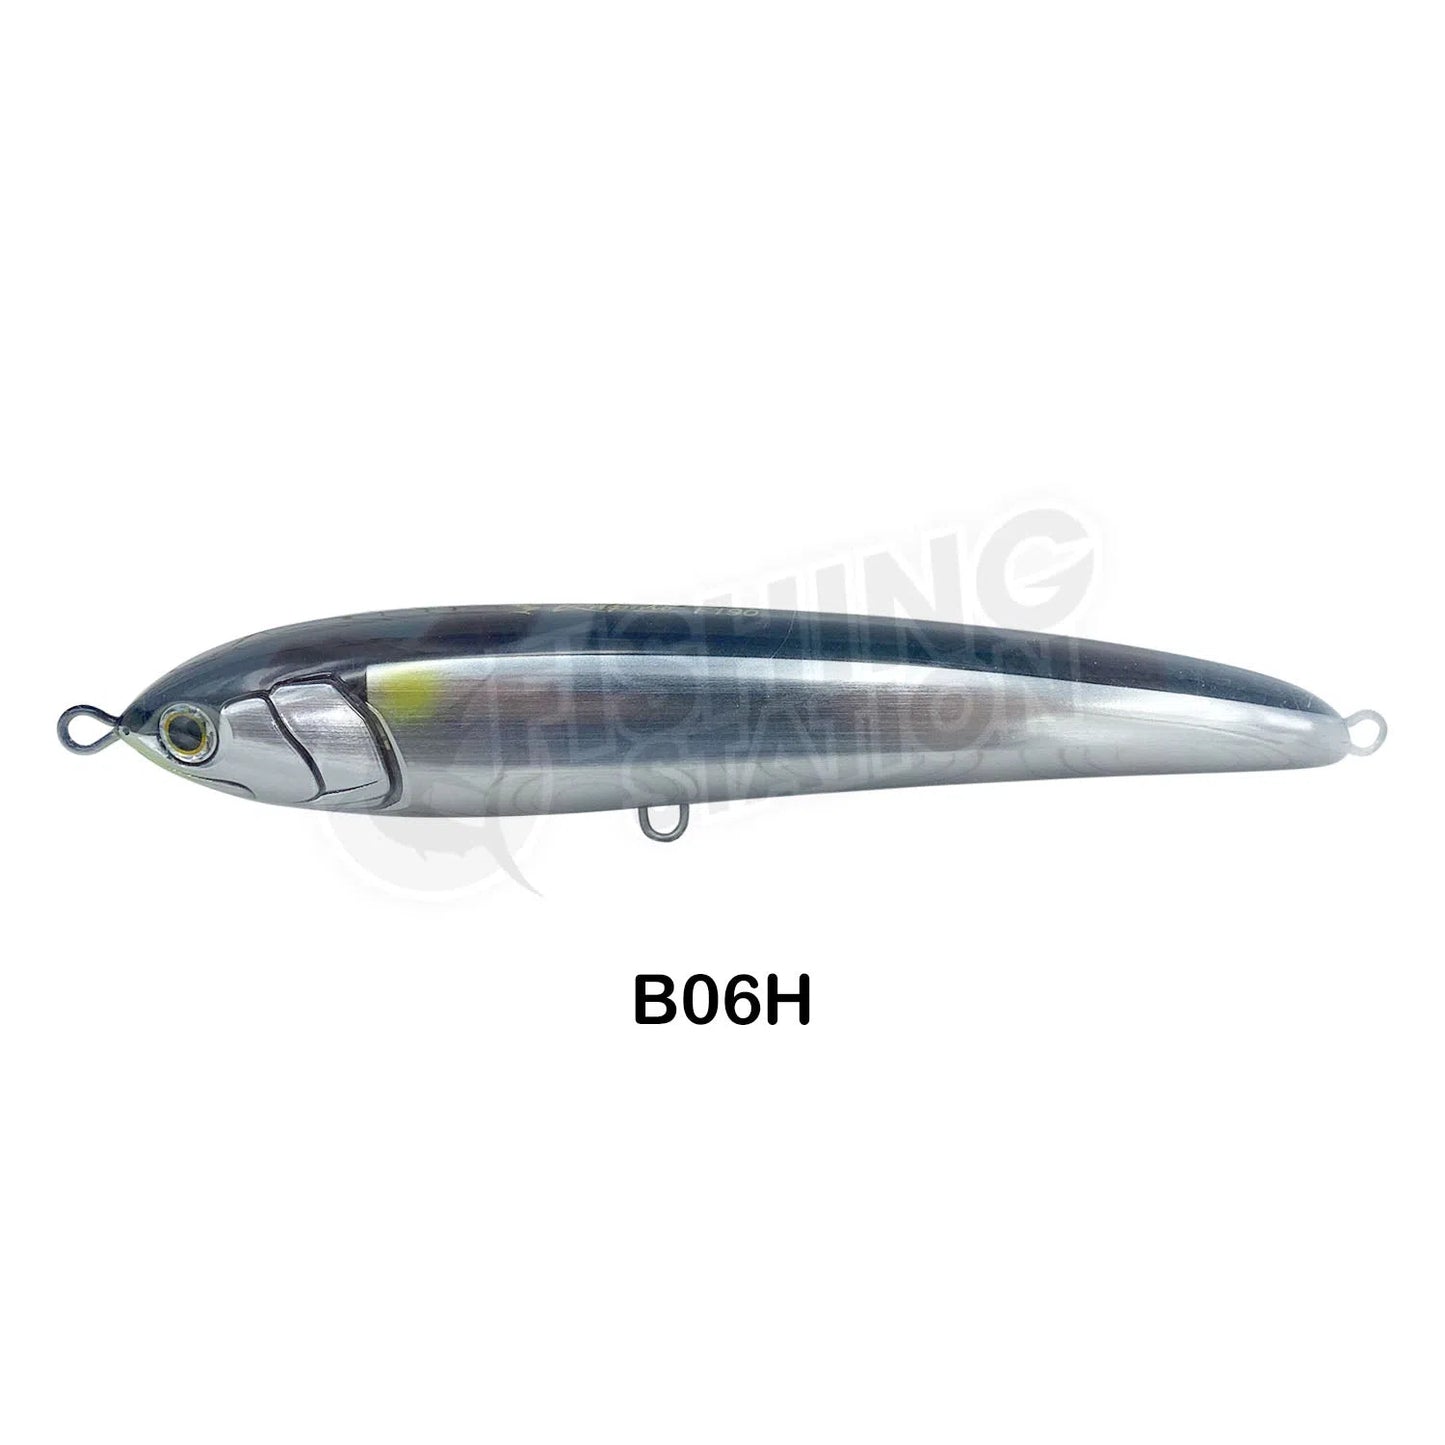 Maria Rapido Floating-Lure - Poppers, Stickbaits & Pencils-Maria-B06H-160mm - 50g-Fishing Station